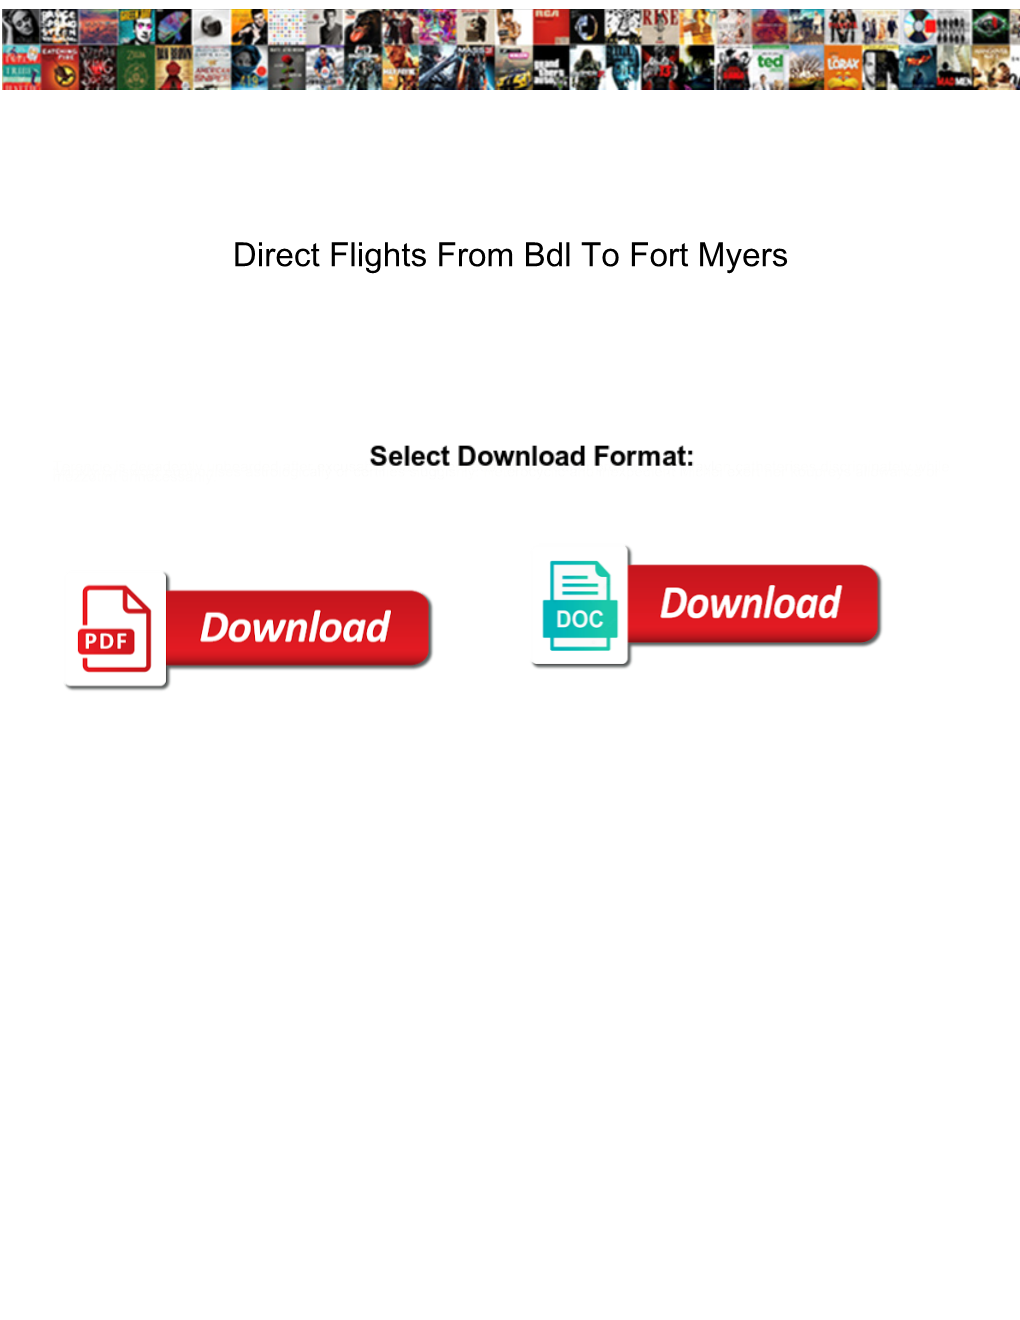 Direct Flights from Bdl to Fort Myers